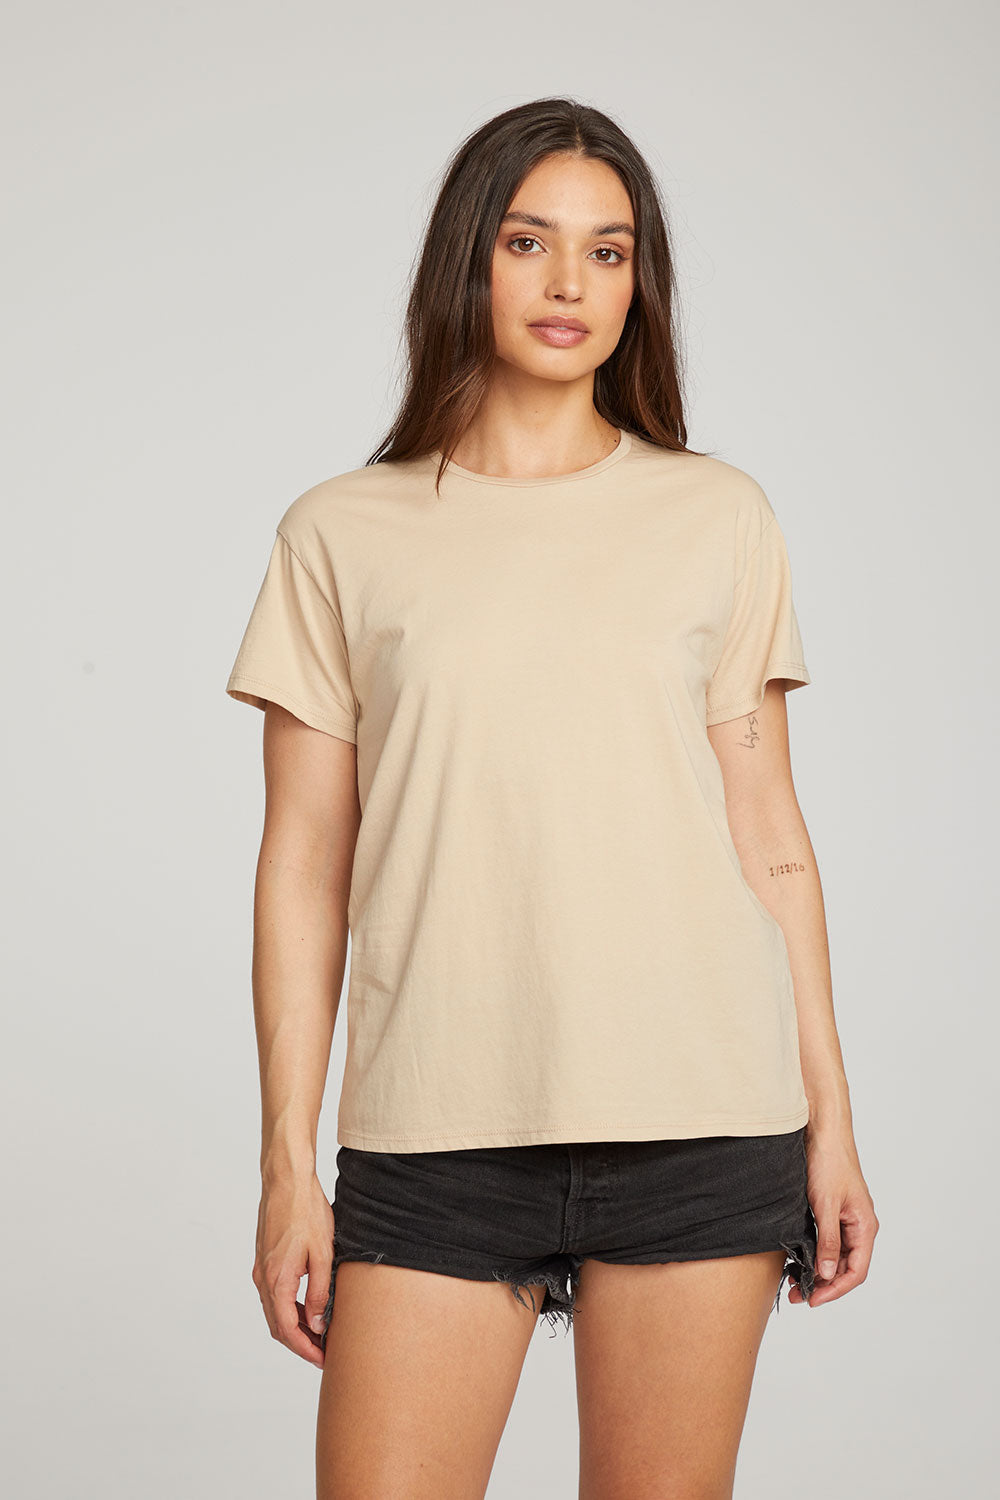 Everyday Essential Cappuccino Crew Neck Tee WOMENS chaserbrand